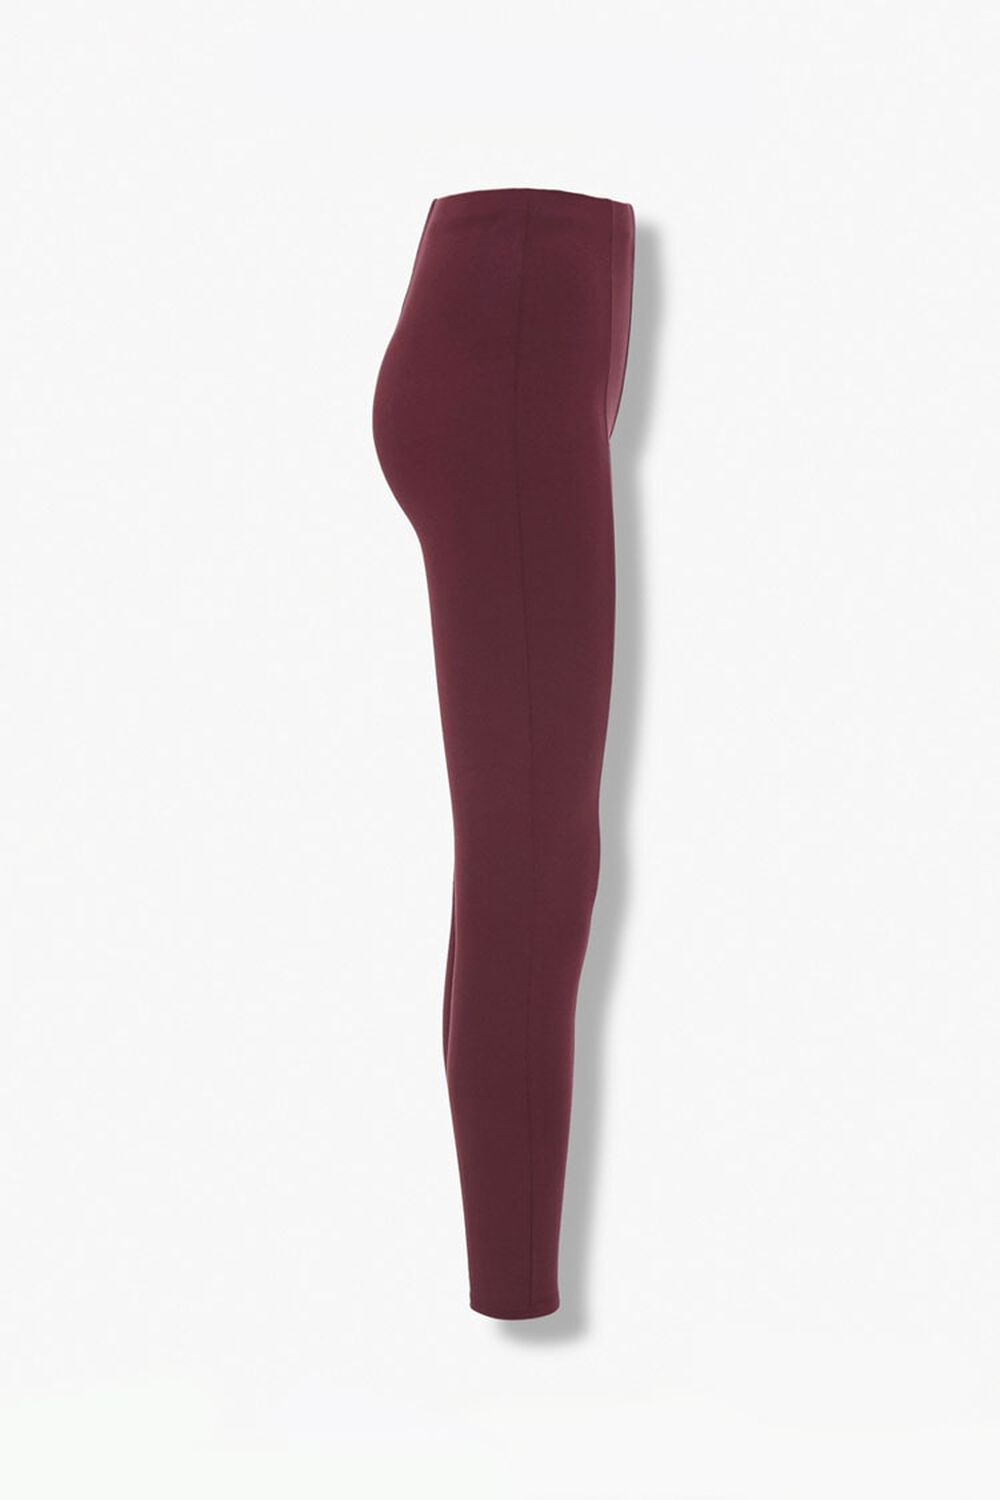 BURGUNDY Classic Thick Knit Leggings, image 2